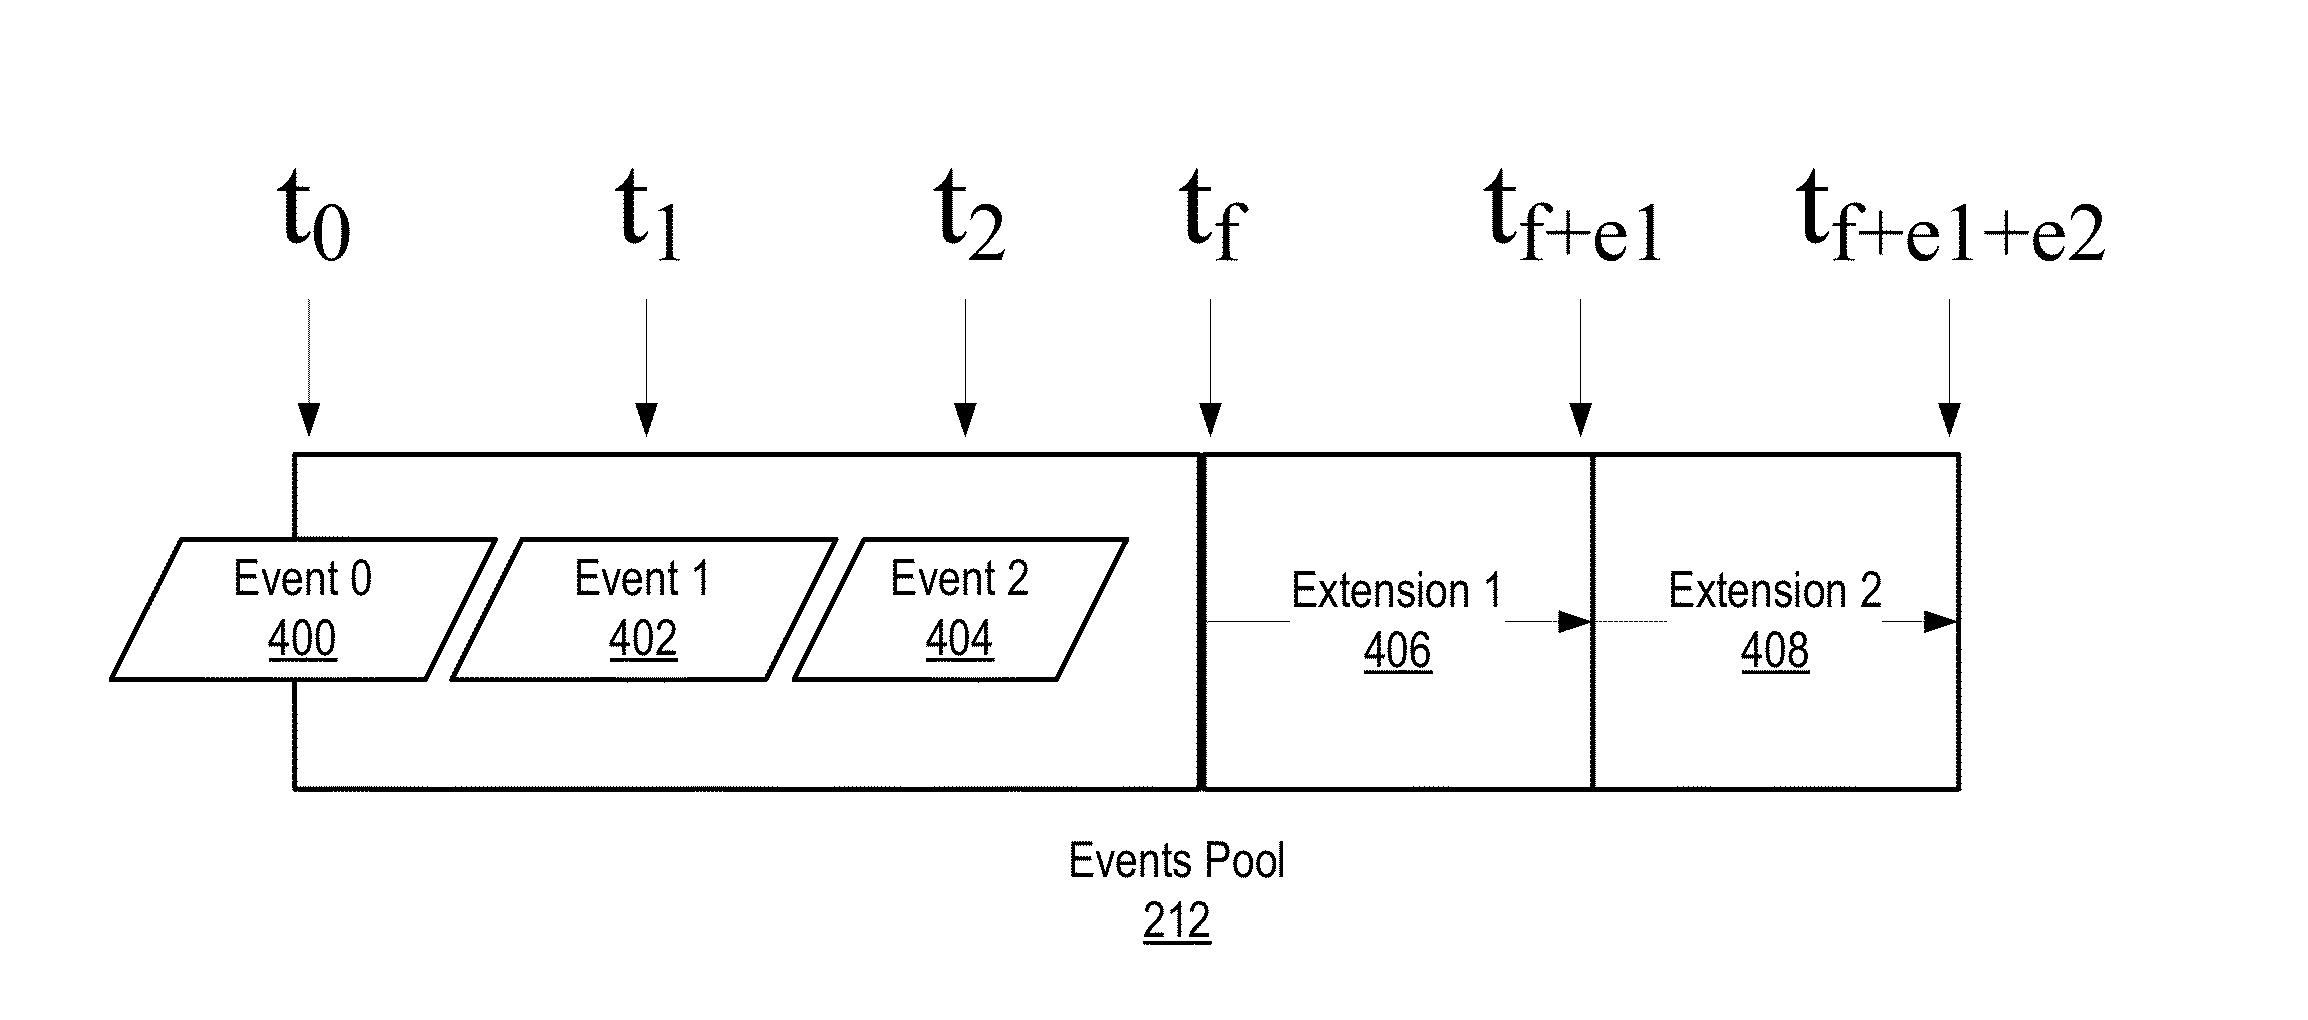 Flexible event data content management for relevant event and alert analysis within a distributed processing system